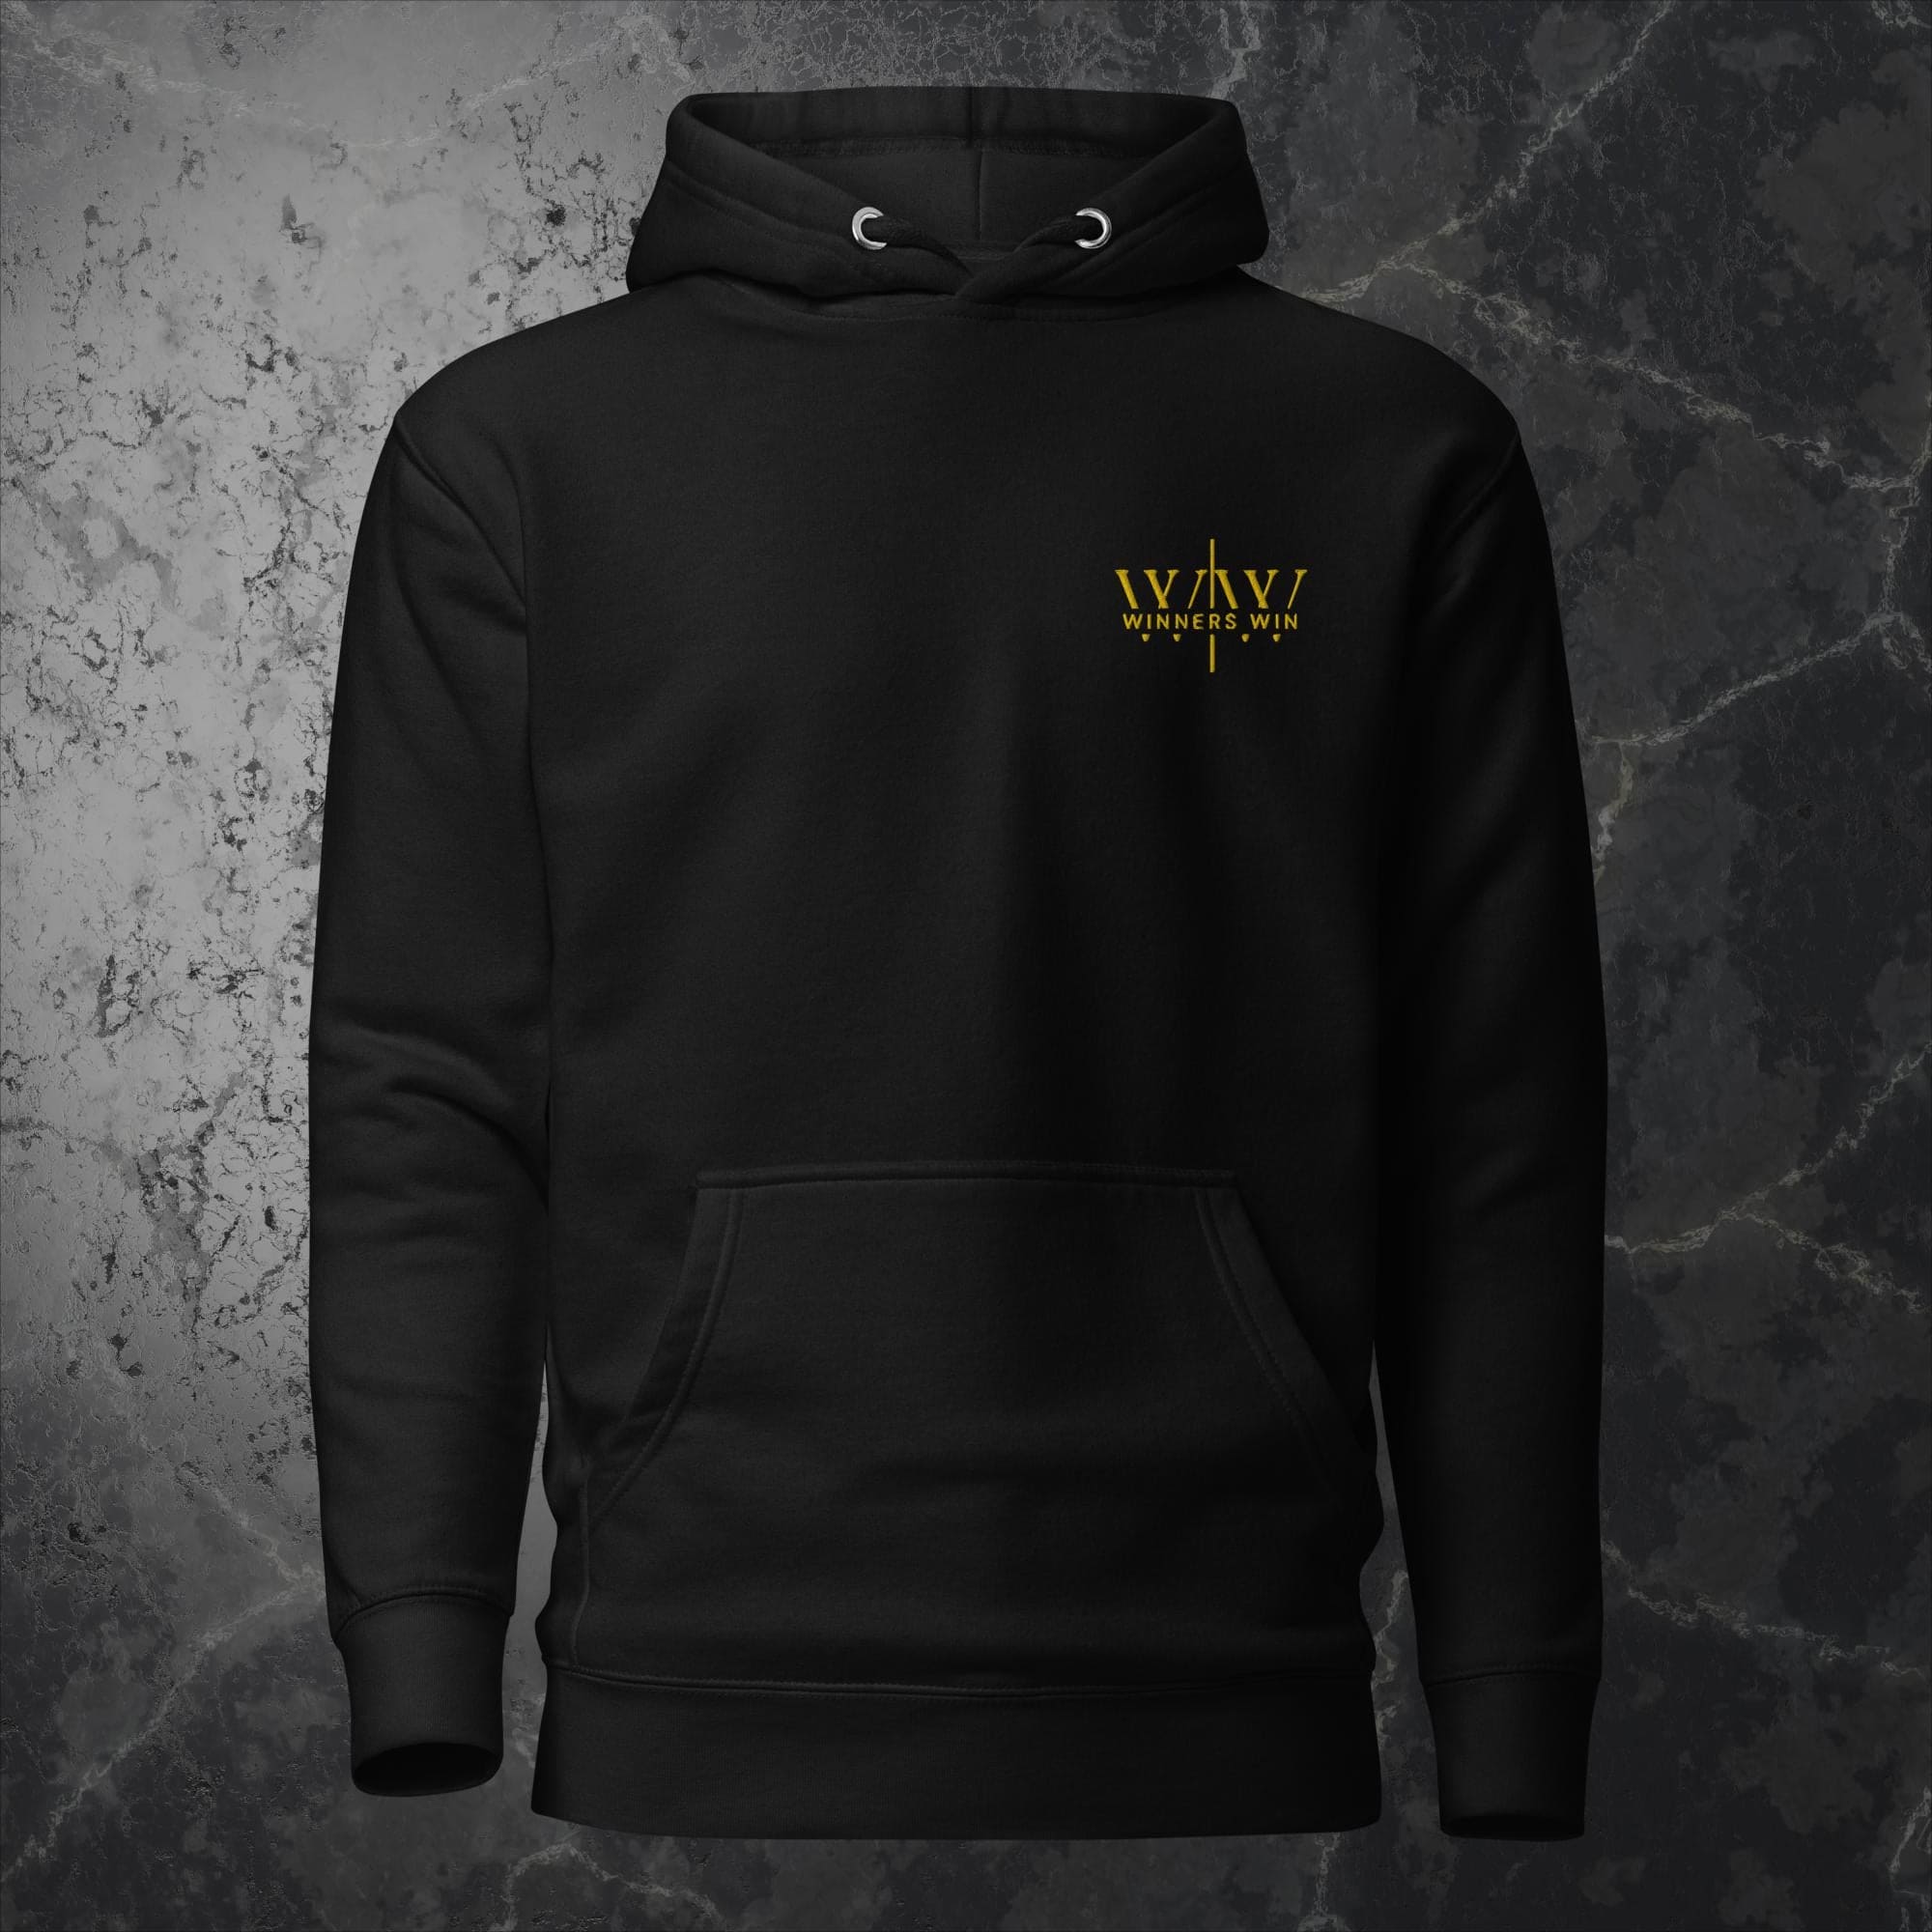 Winners Win black hoodie with gold embroidered logo 